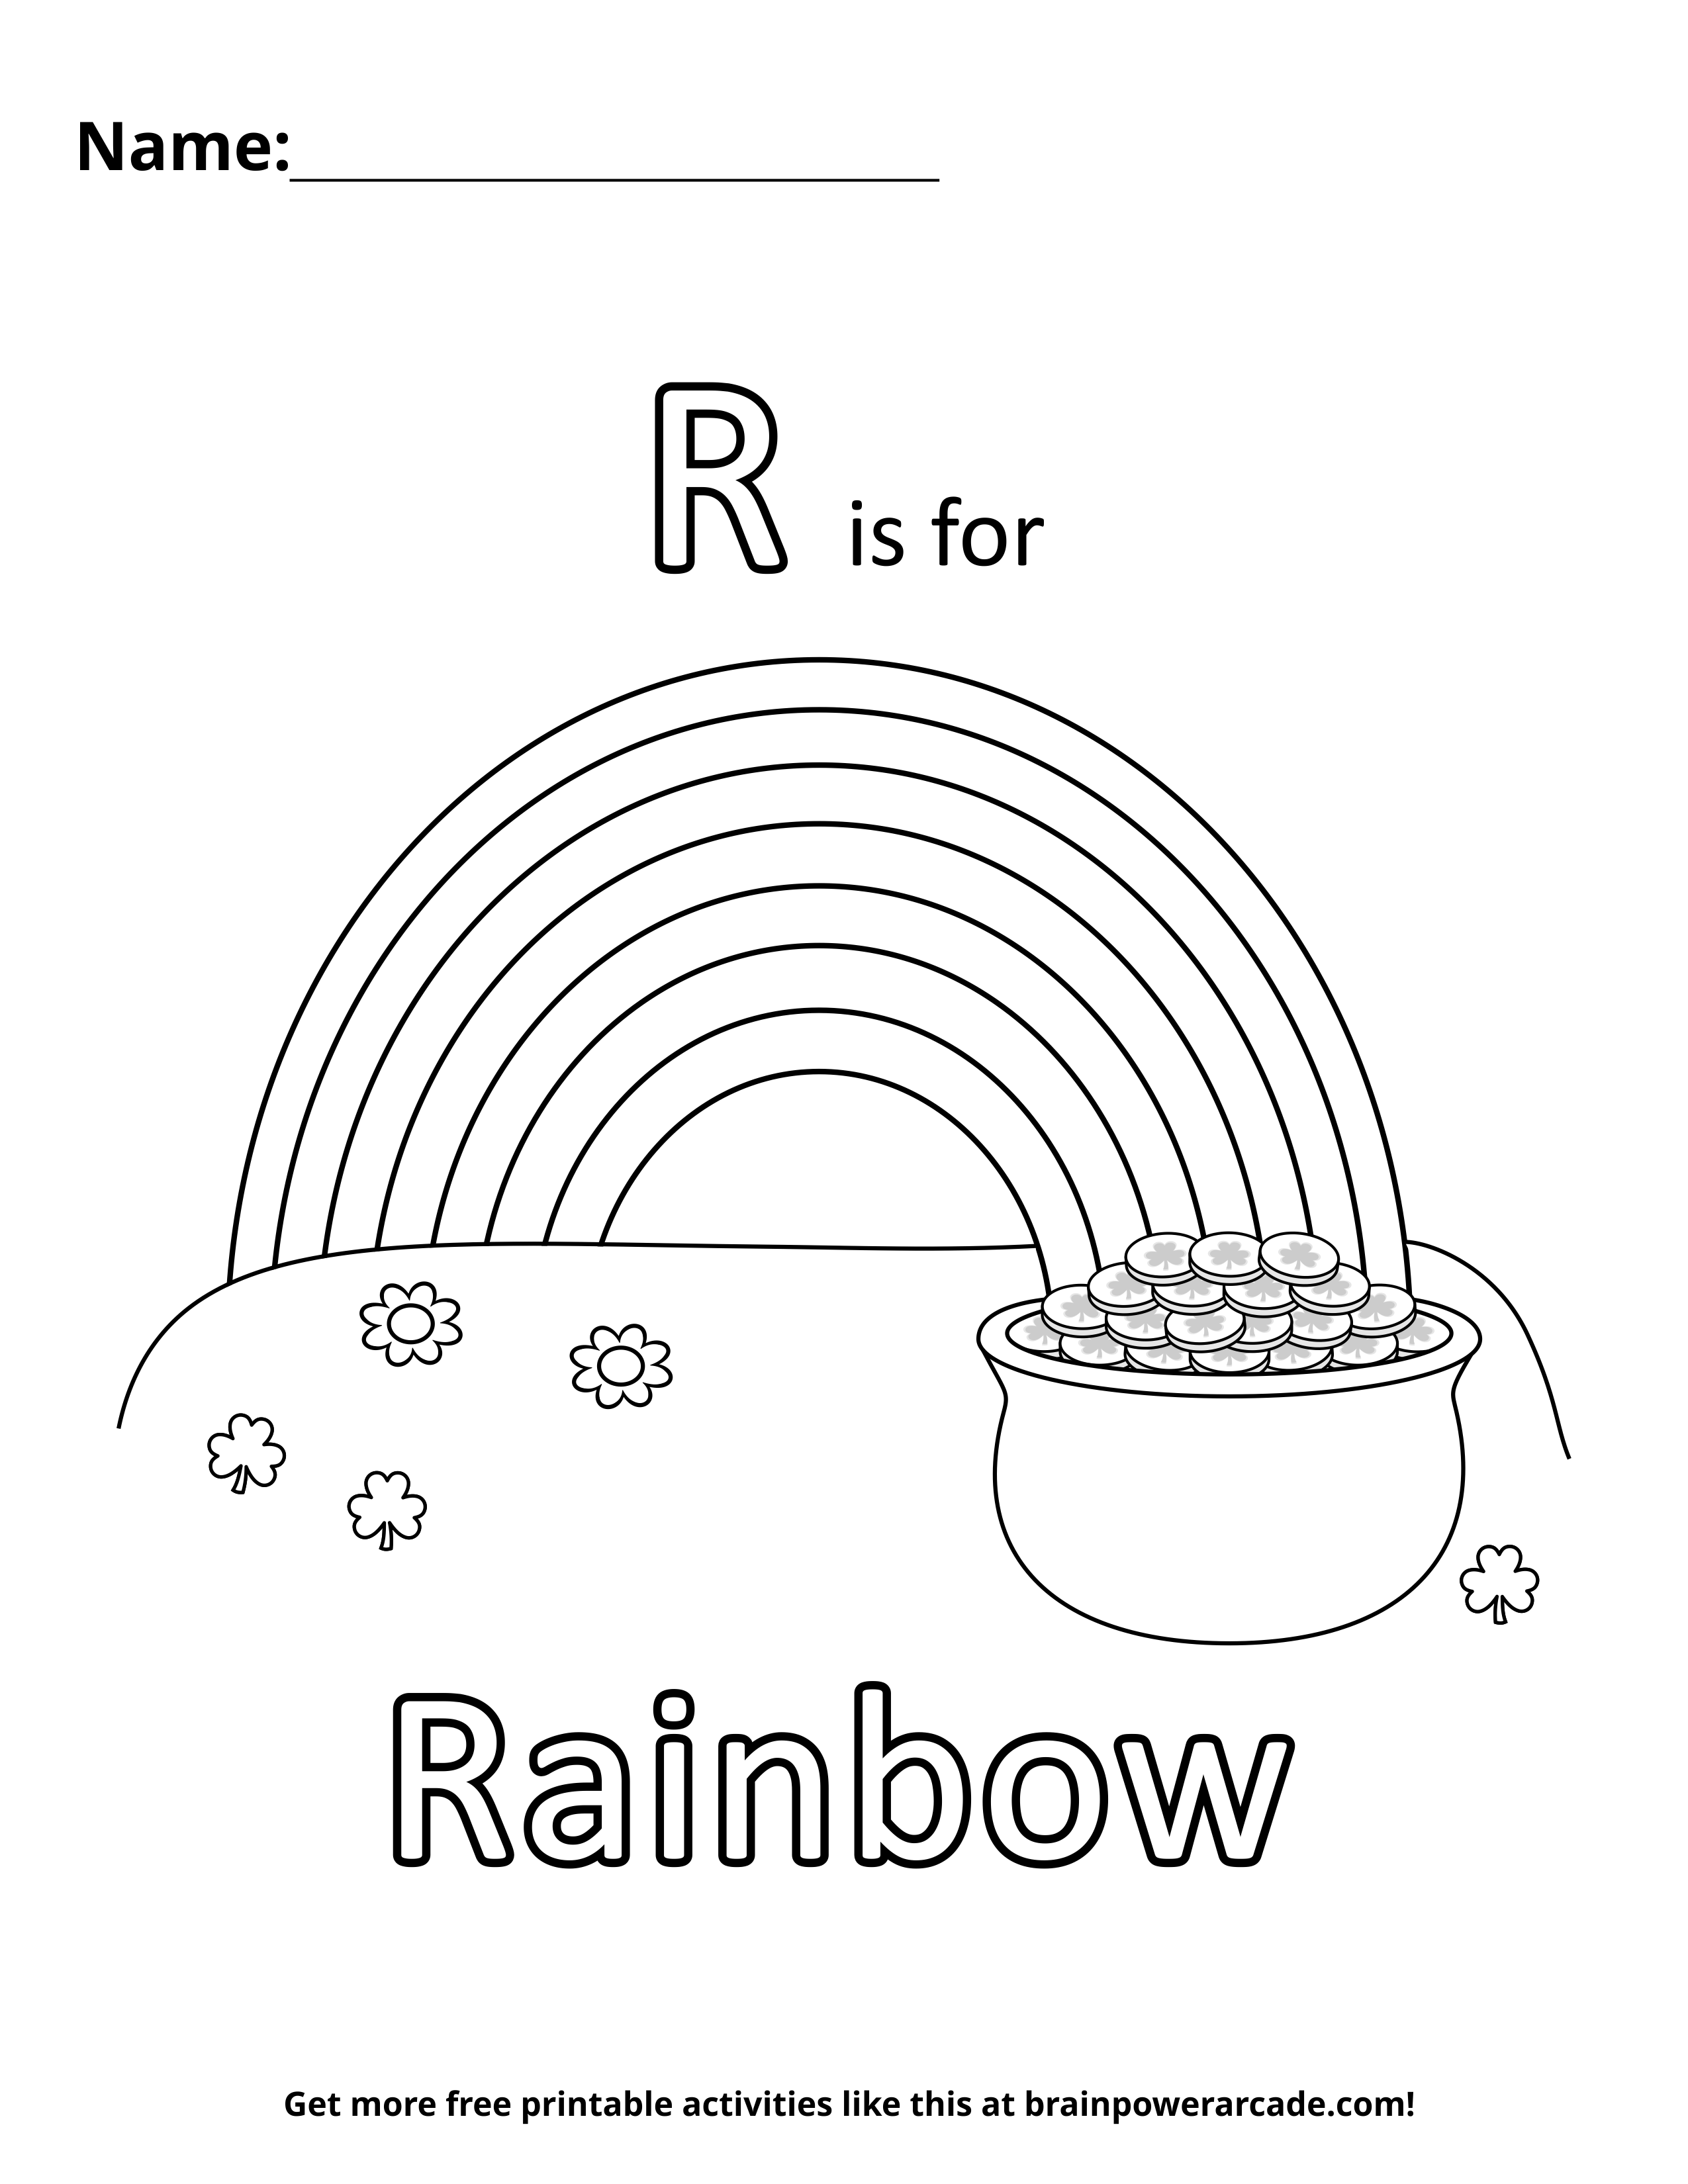 R is for Rainbow